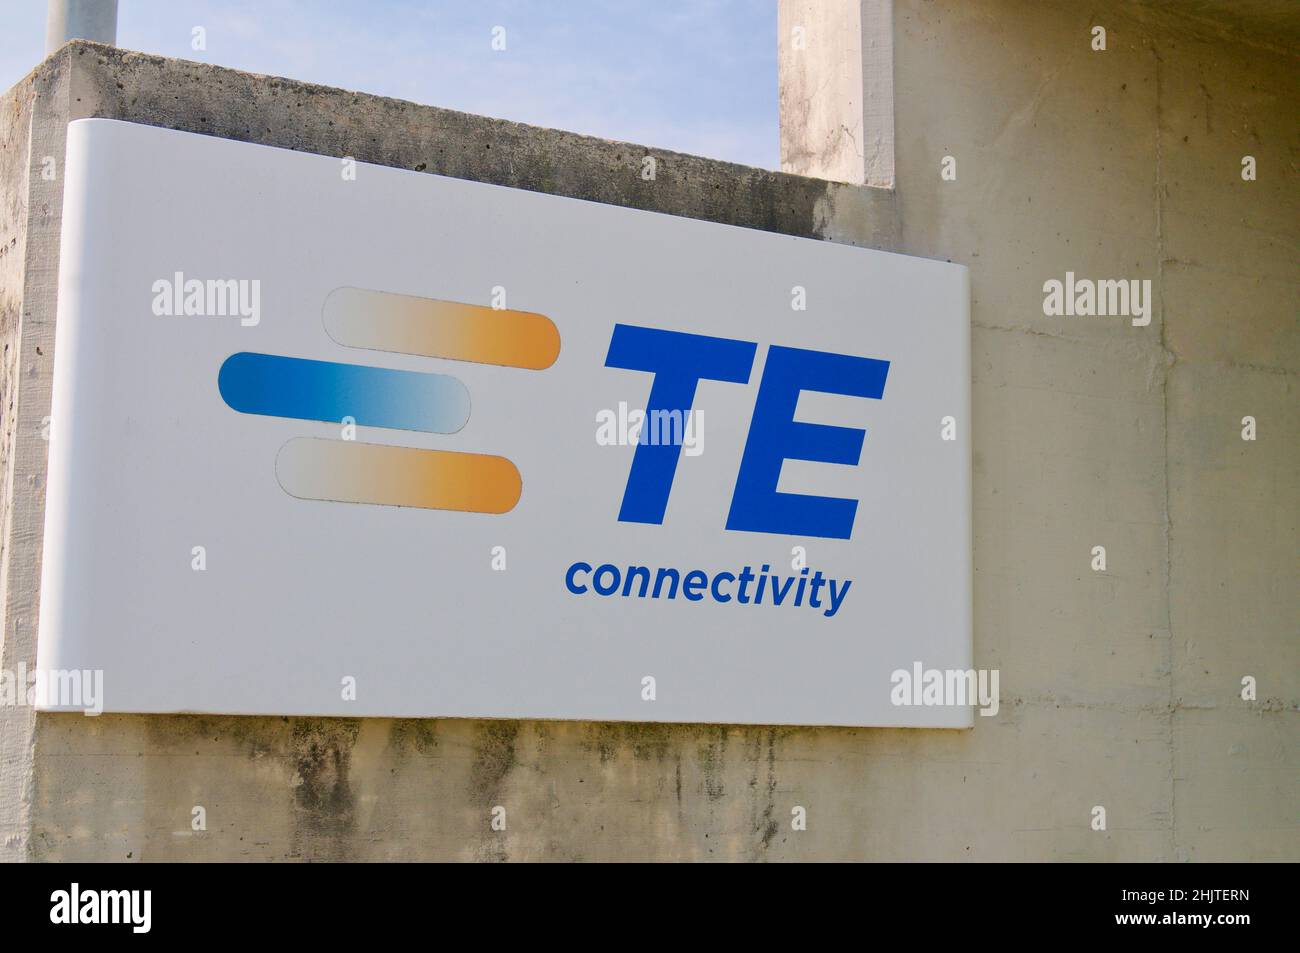 Bioggio, Switzerland - 25th April 2021 : TE Connectivity sign. TE Connectivity is a Swiss-domiciled technology company that designs and manufactures c Stock Photo